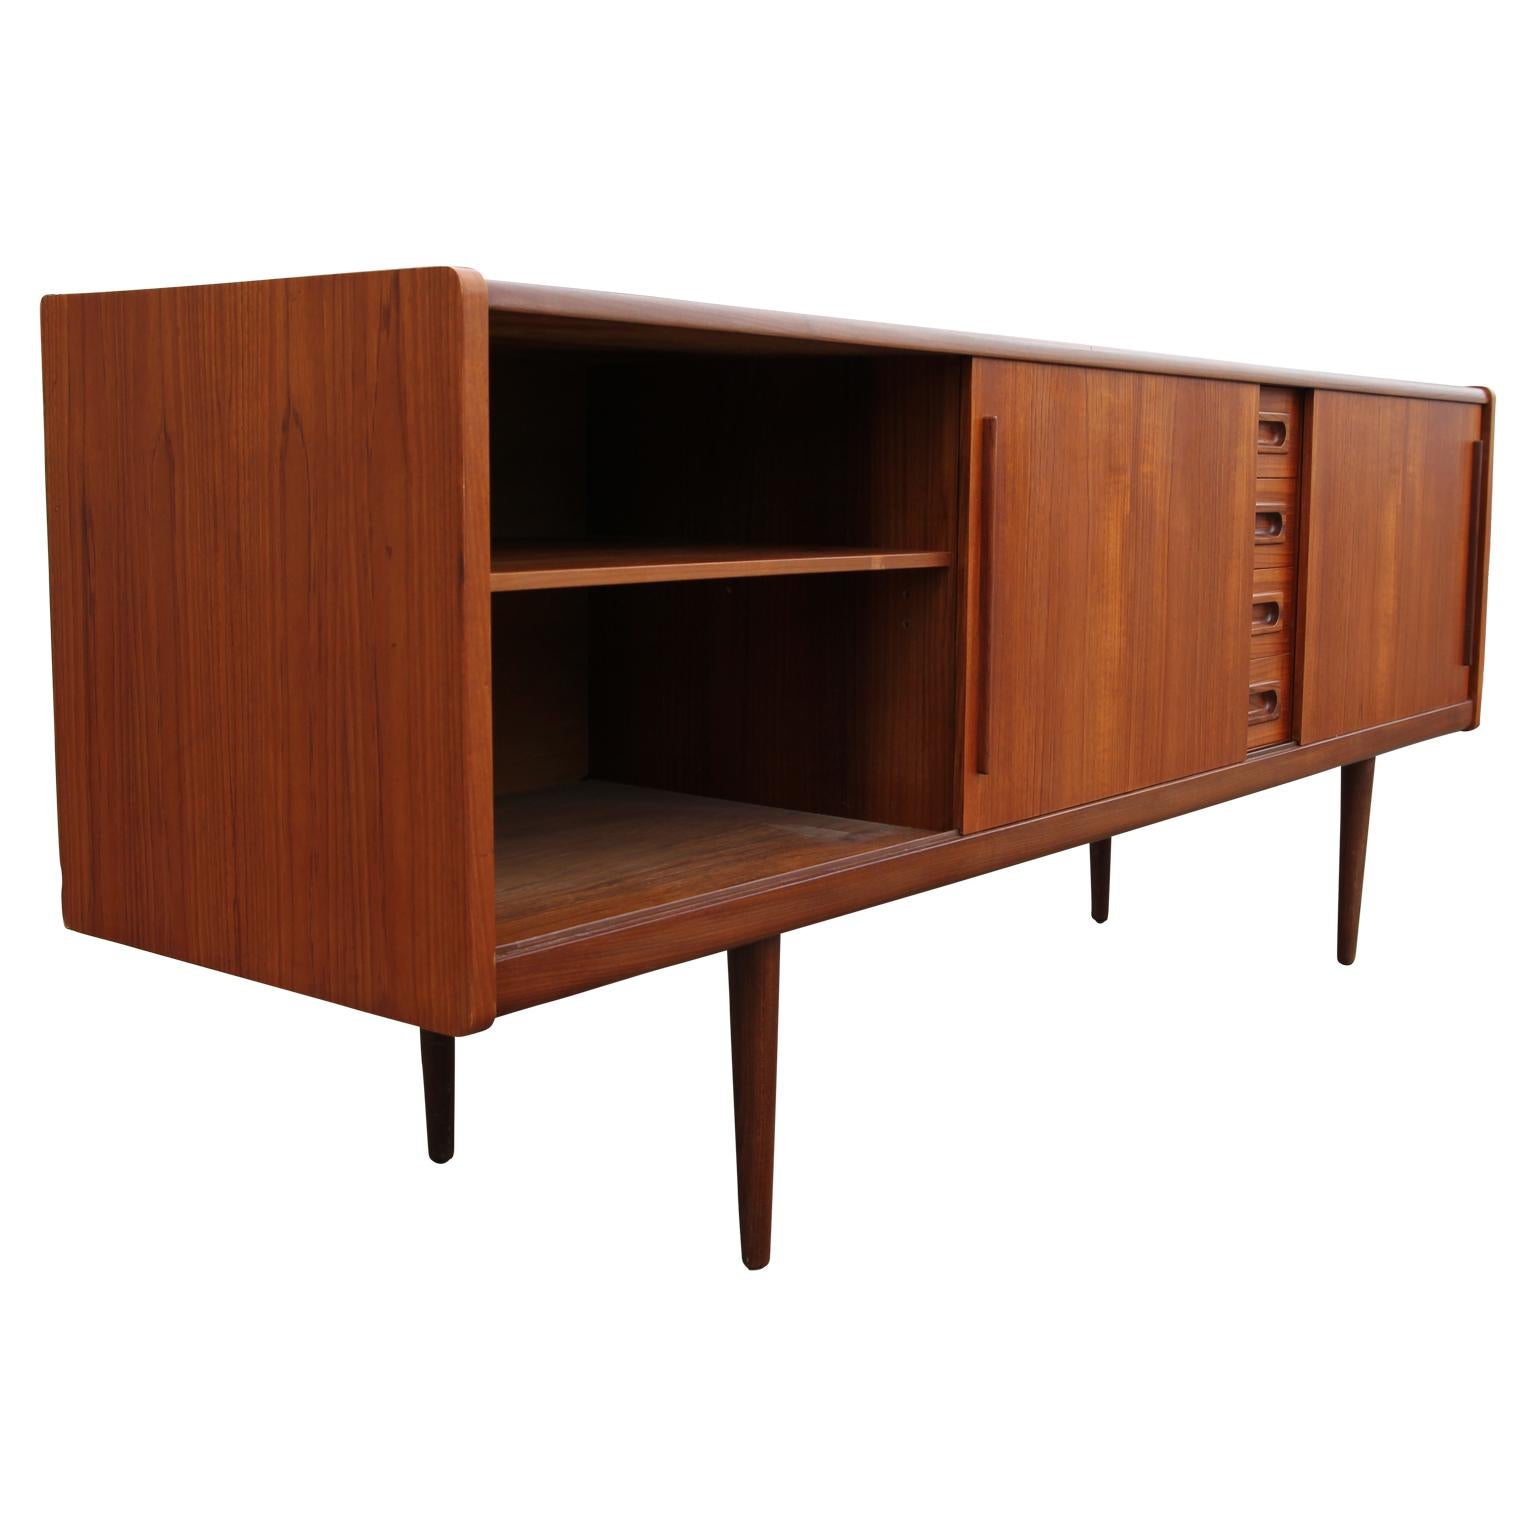 Danish modern teak sideboard or credenza with four central pull out drawers and a set of sliding door cabinets on either side. The clean lines and unique handles make for an elegant, yet functional storage space.